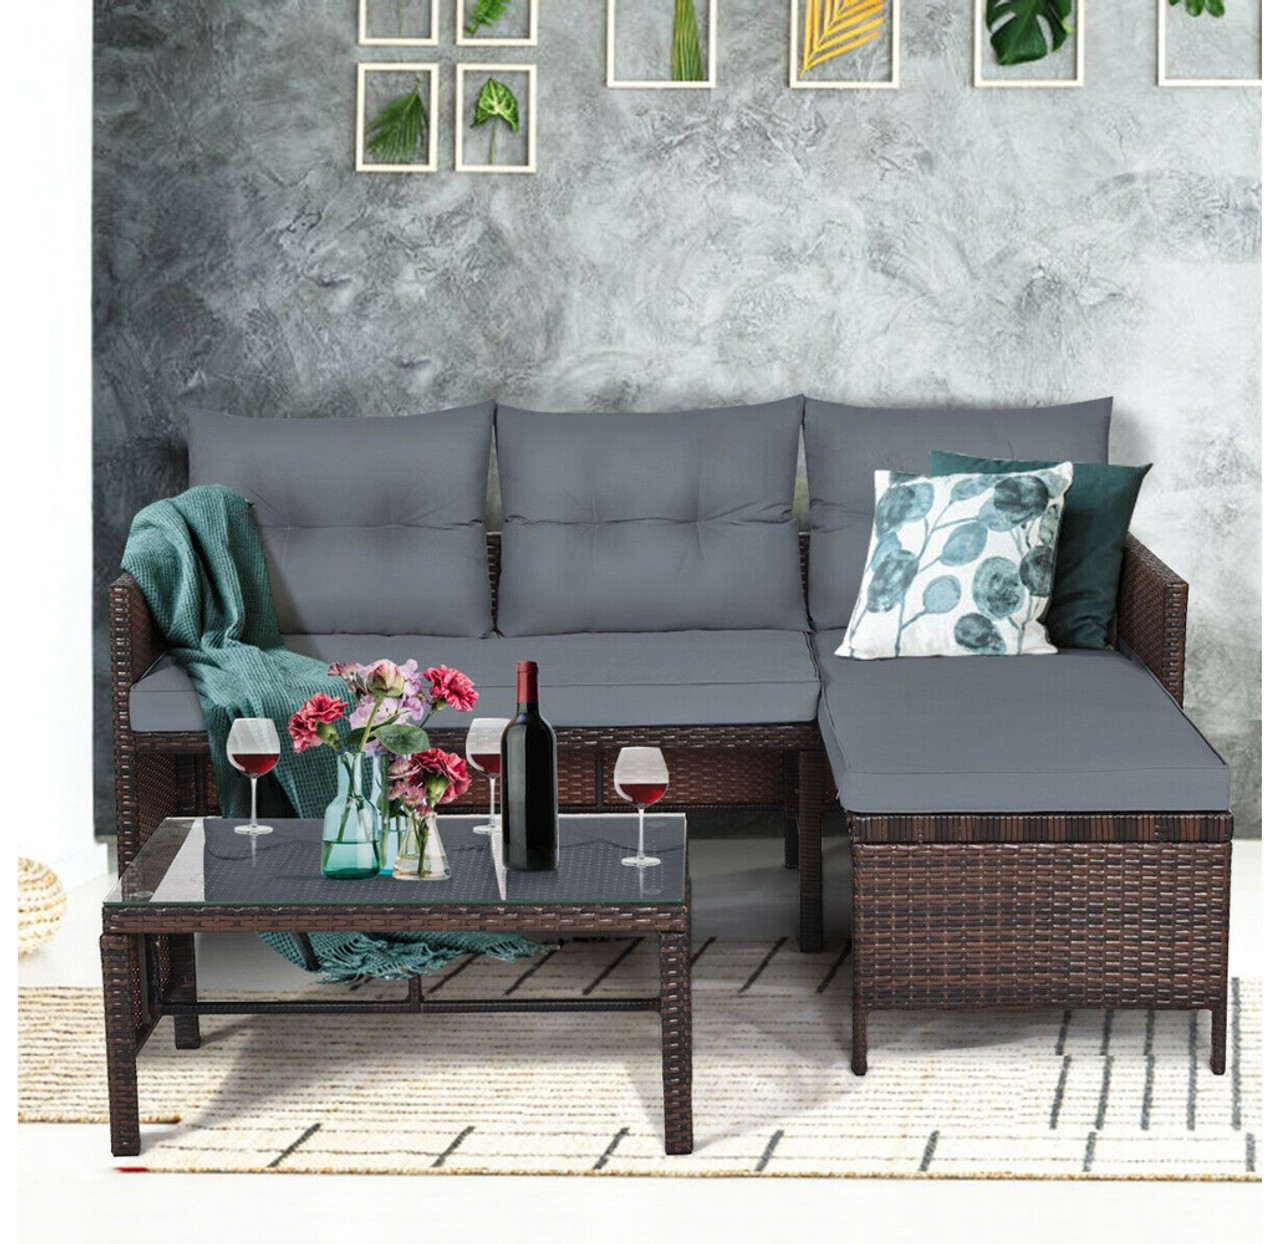 Rattan Wicker Outdoor 3-Piece Patio Sectional product image